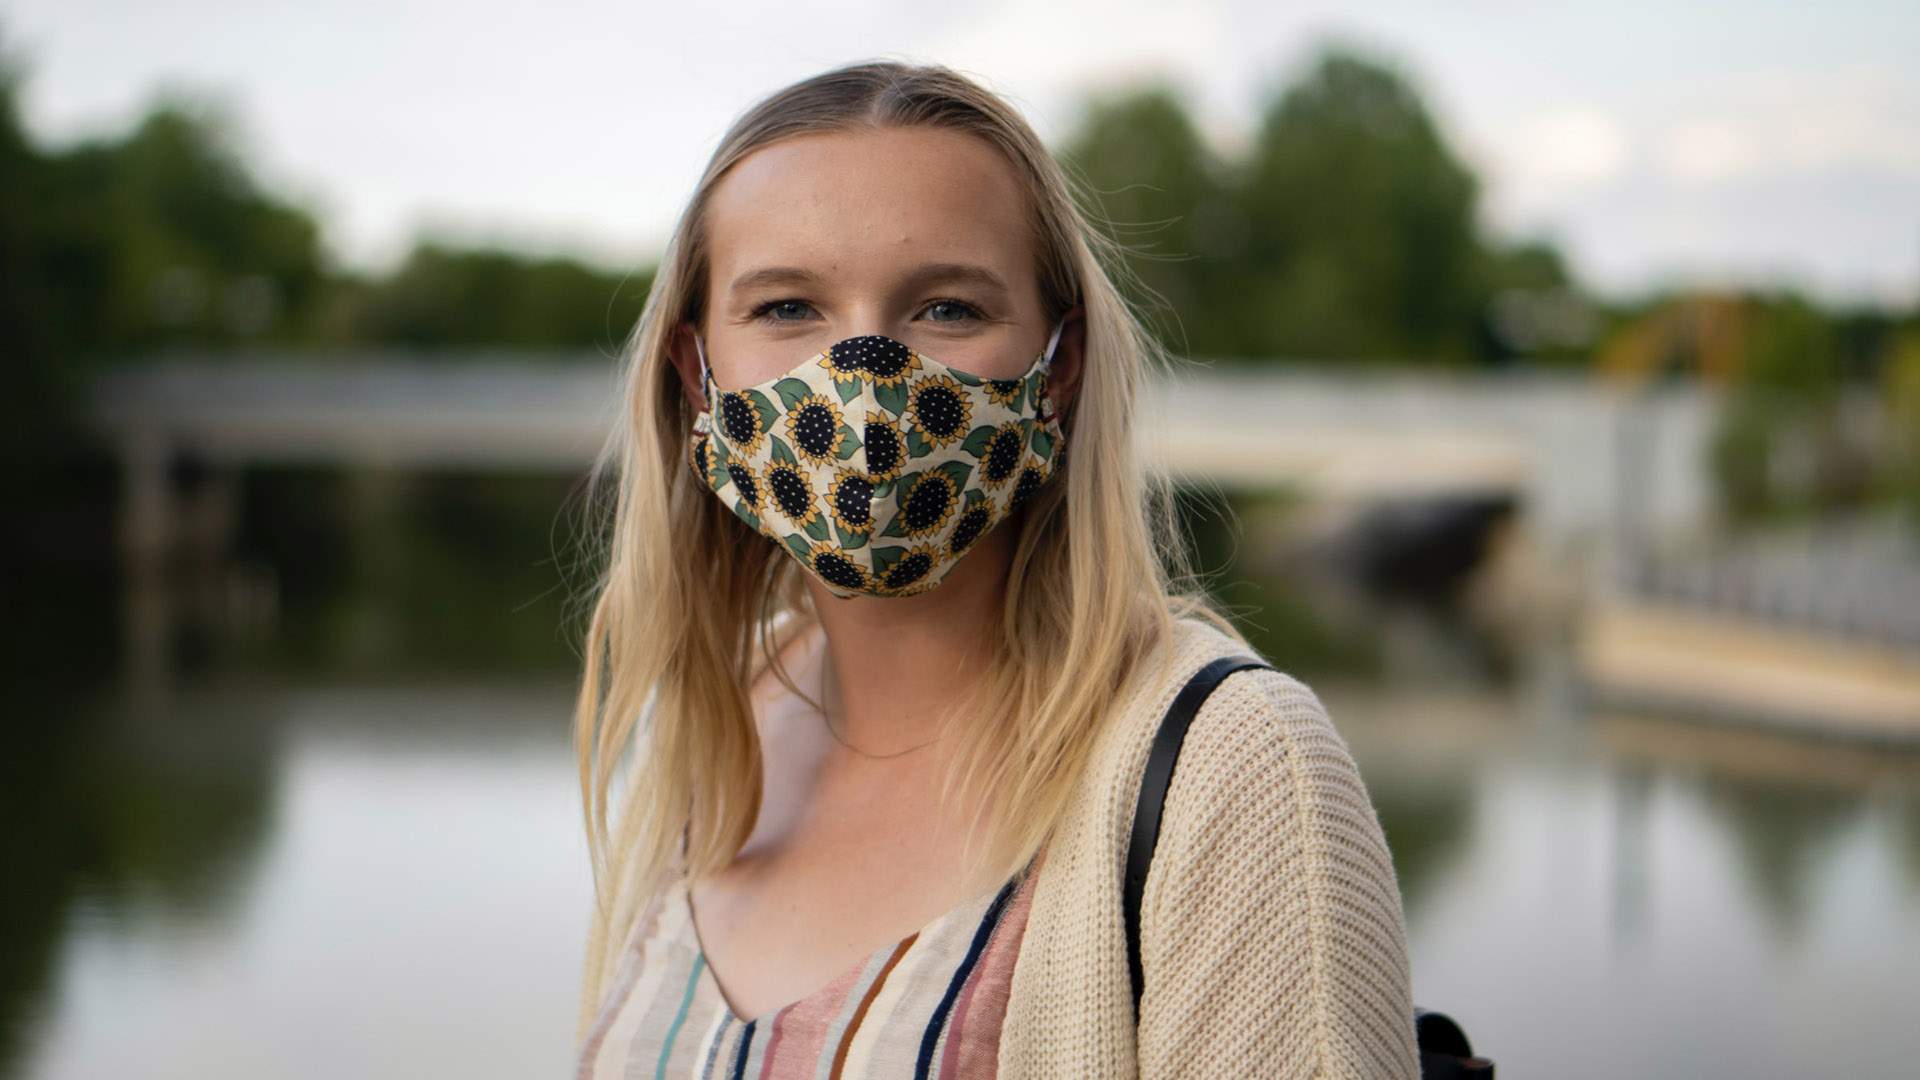 The NSW Government Strongly Recommends That Sydneysiders Wear Face Masks